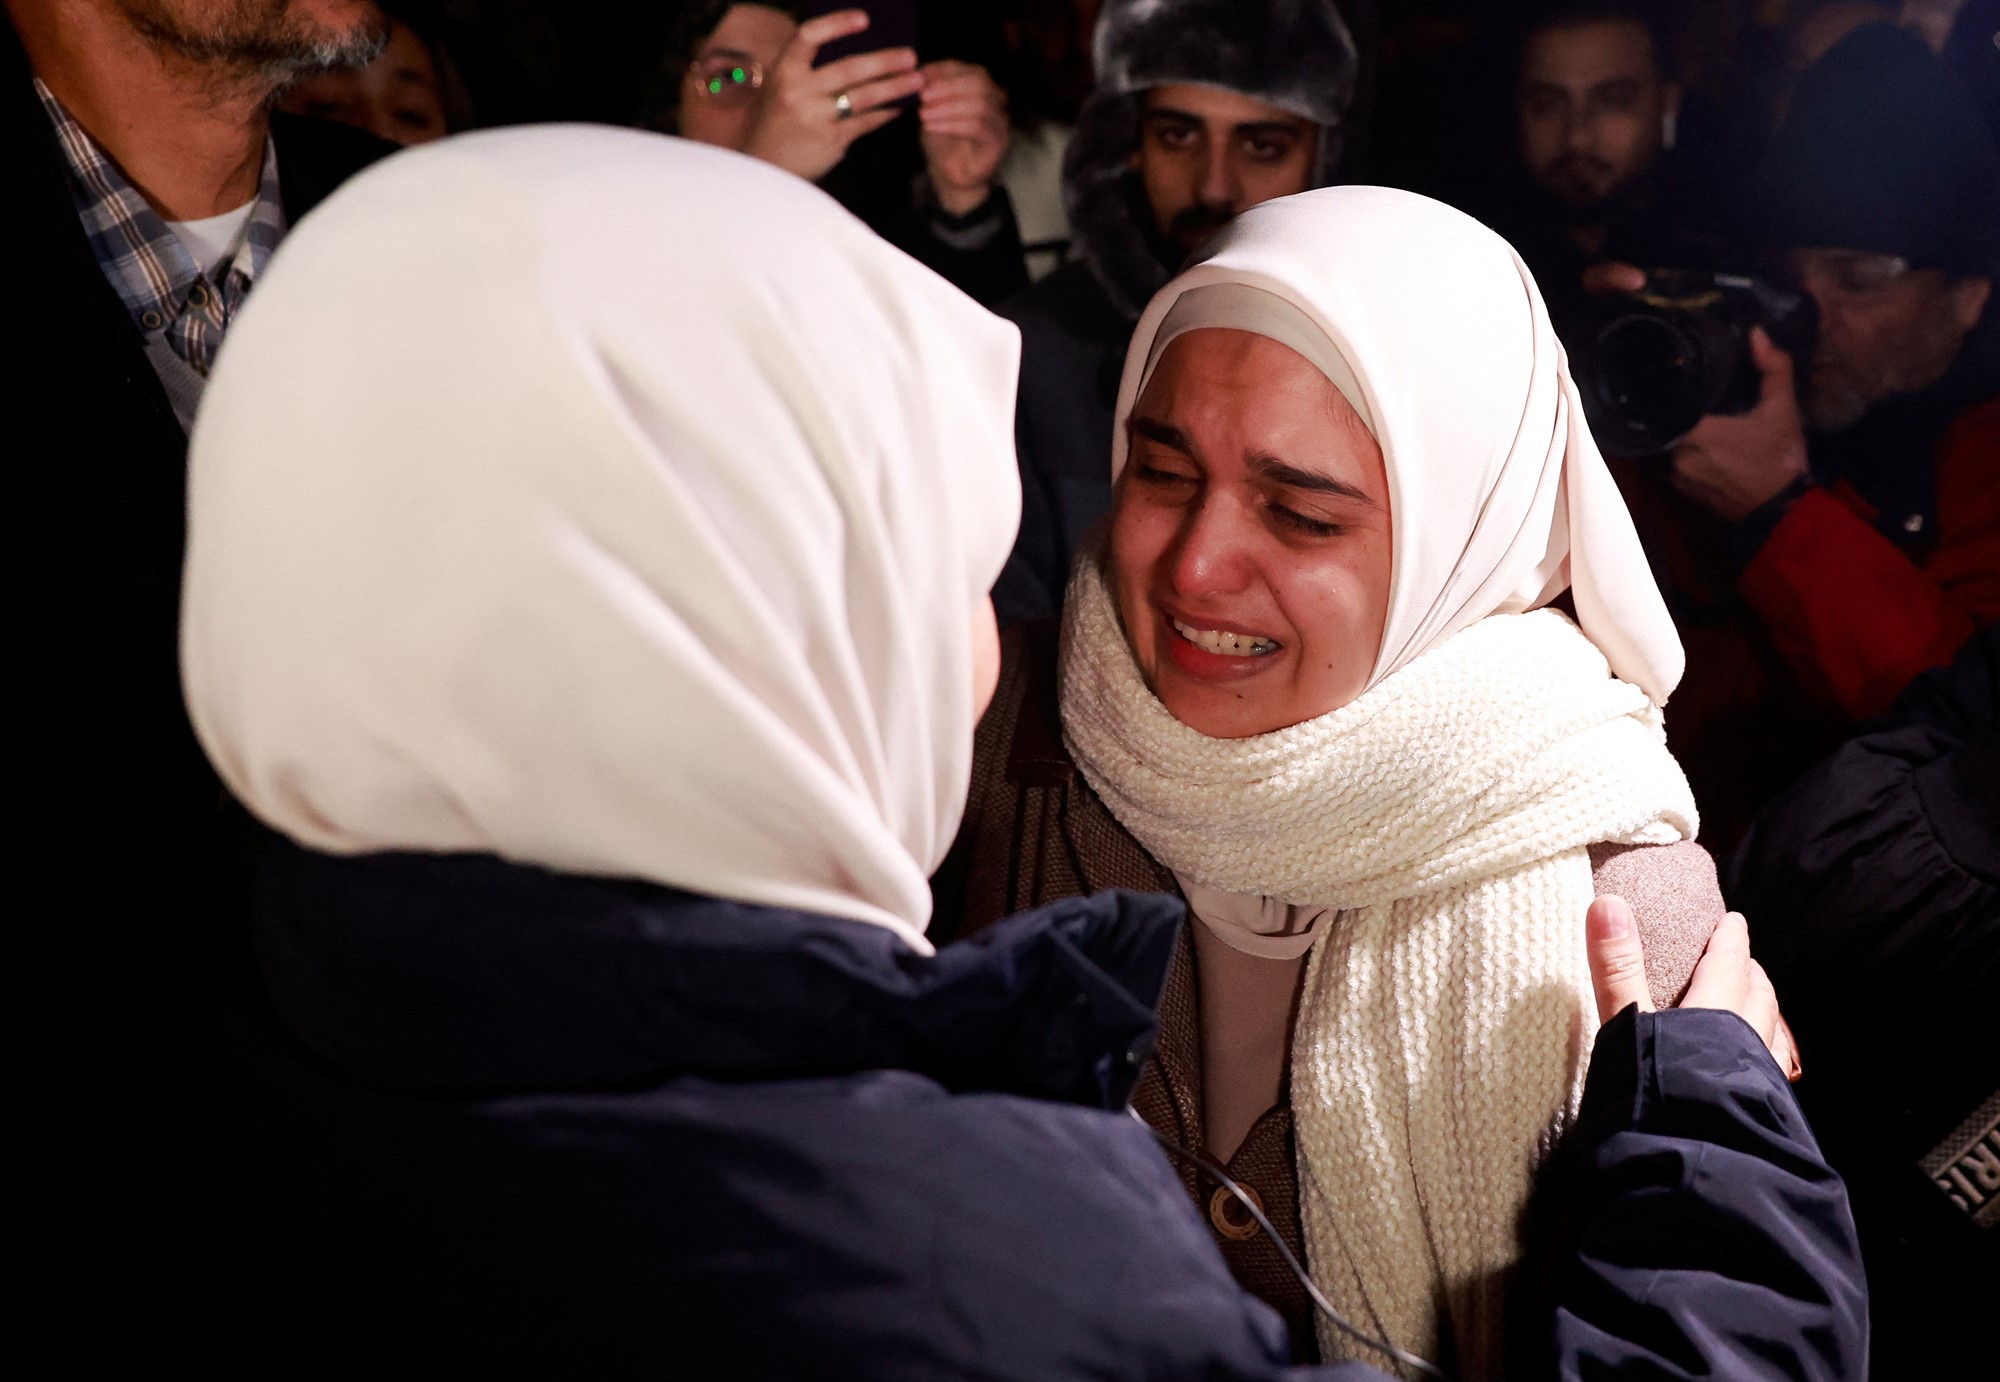 A close up of two women wearing headscarves embracing, one crying